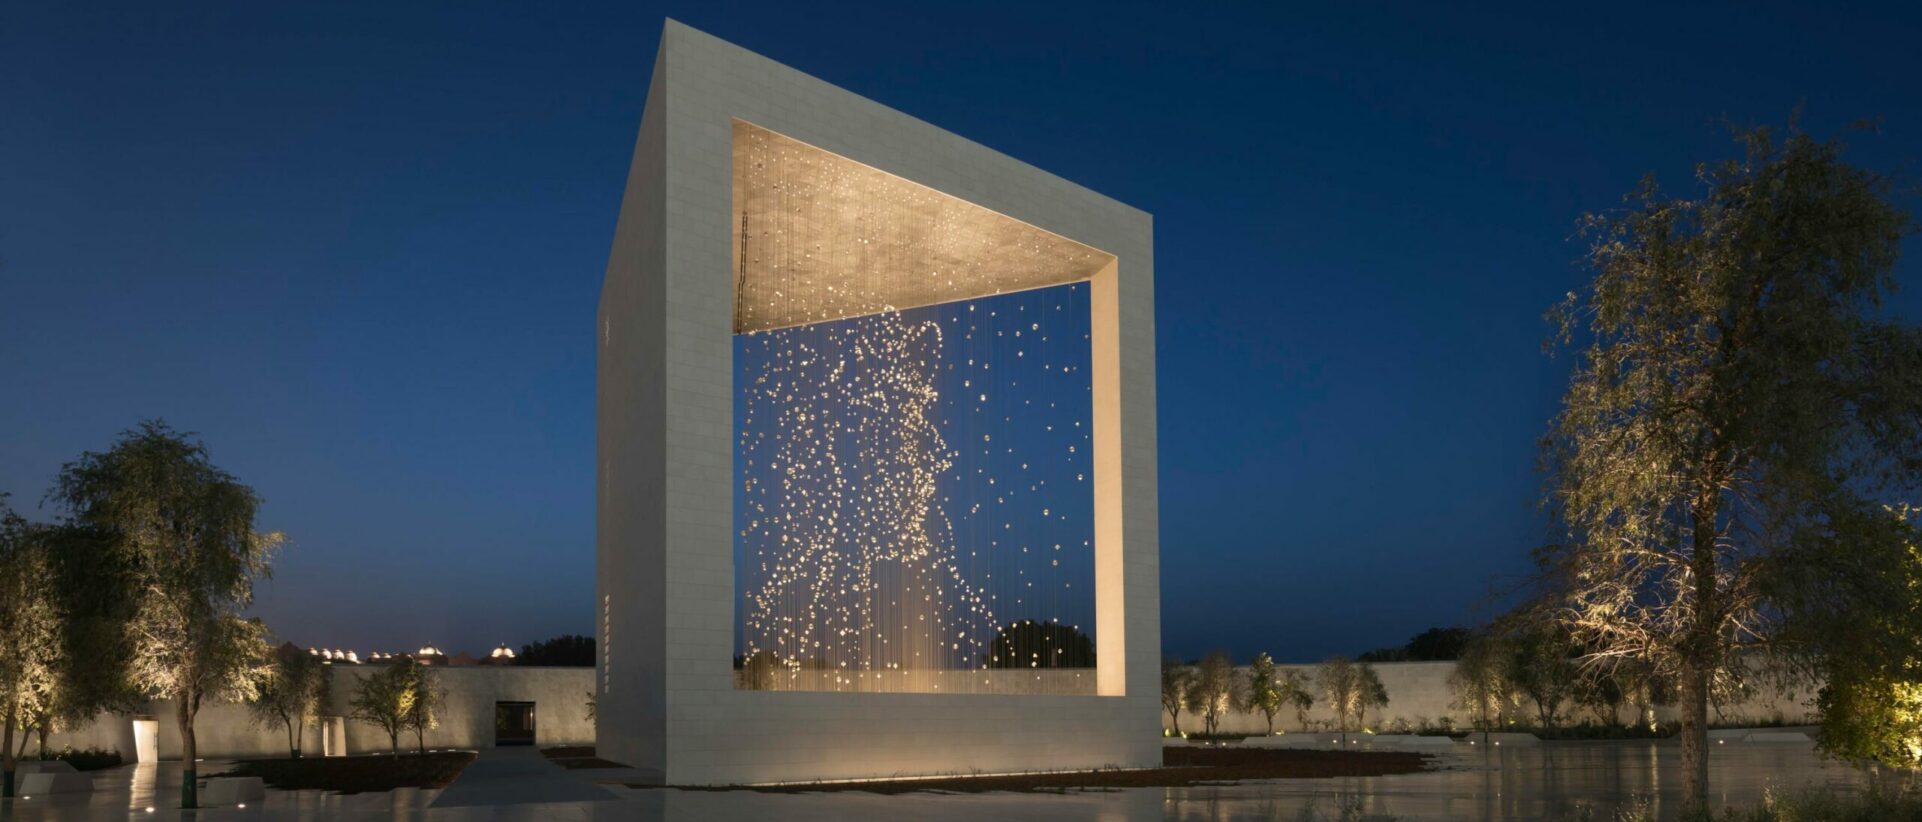 A night time shot of the constellation sculpture in the Founder's Memorial in Abu Dhabi, UAE.